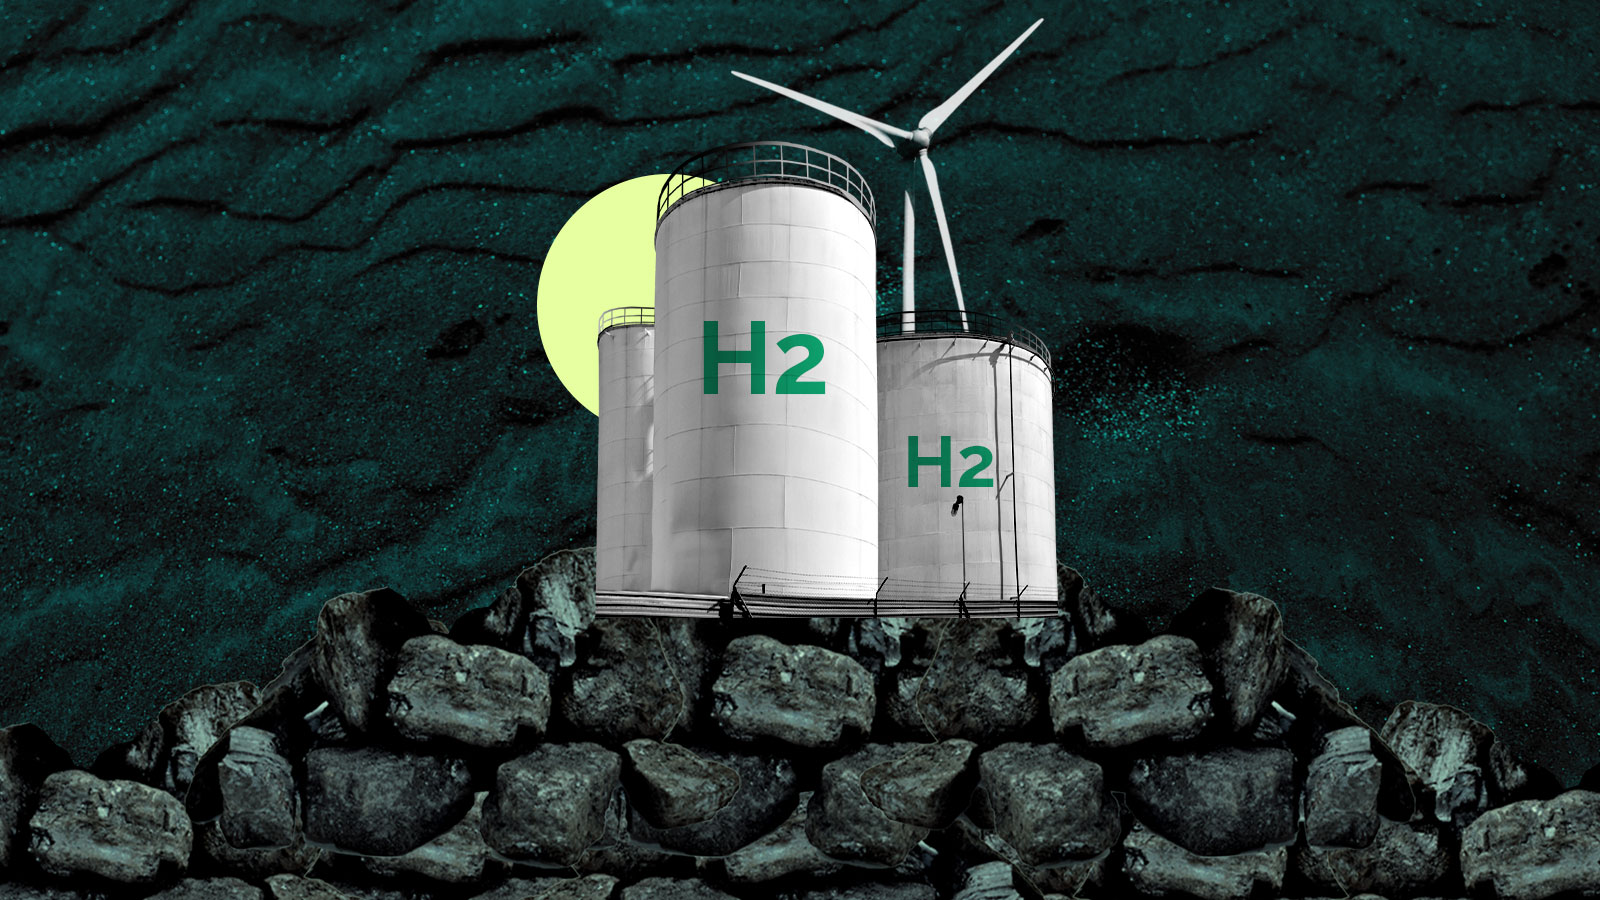 Collage: hydrogen factory and wind turbine on mountain of coal with ominous dark background